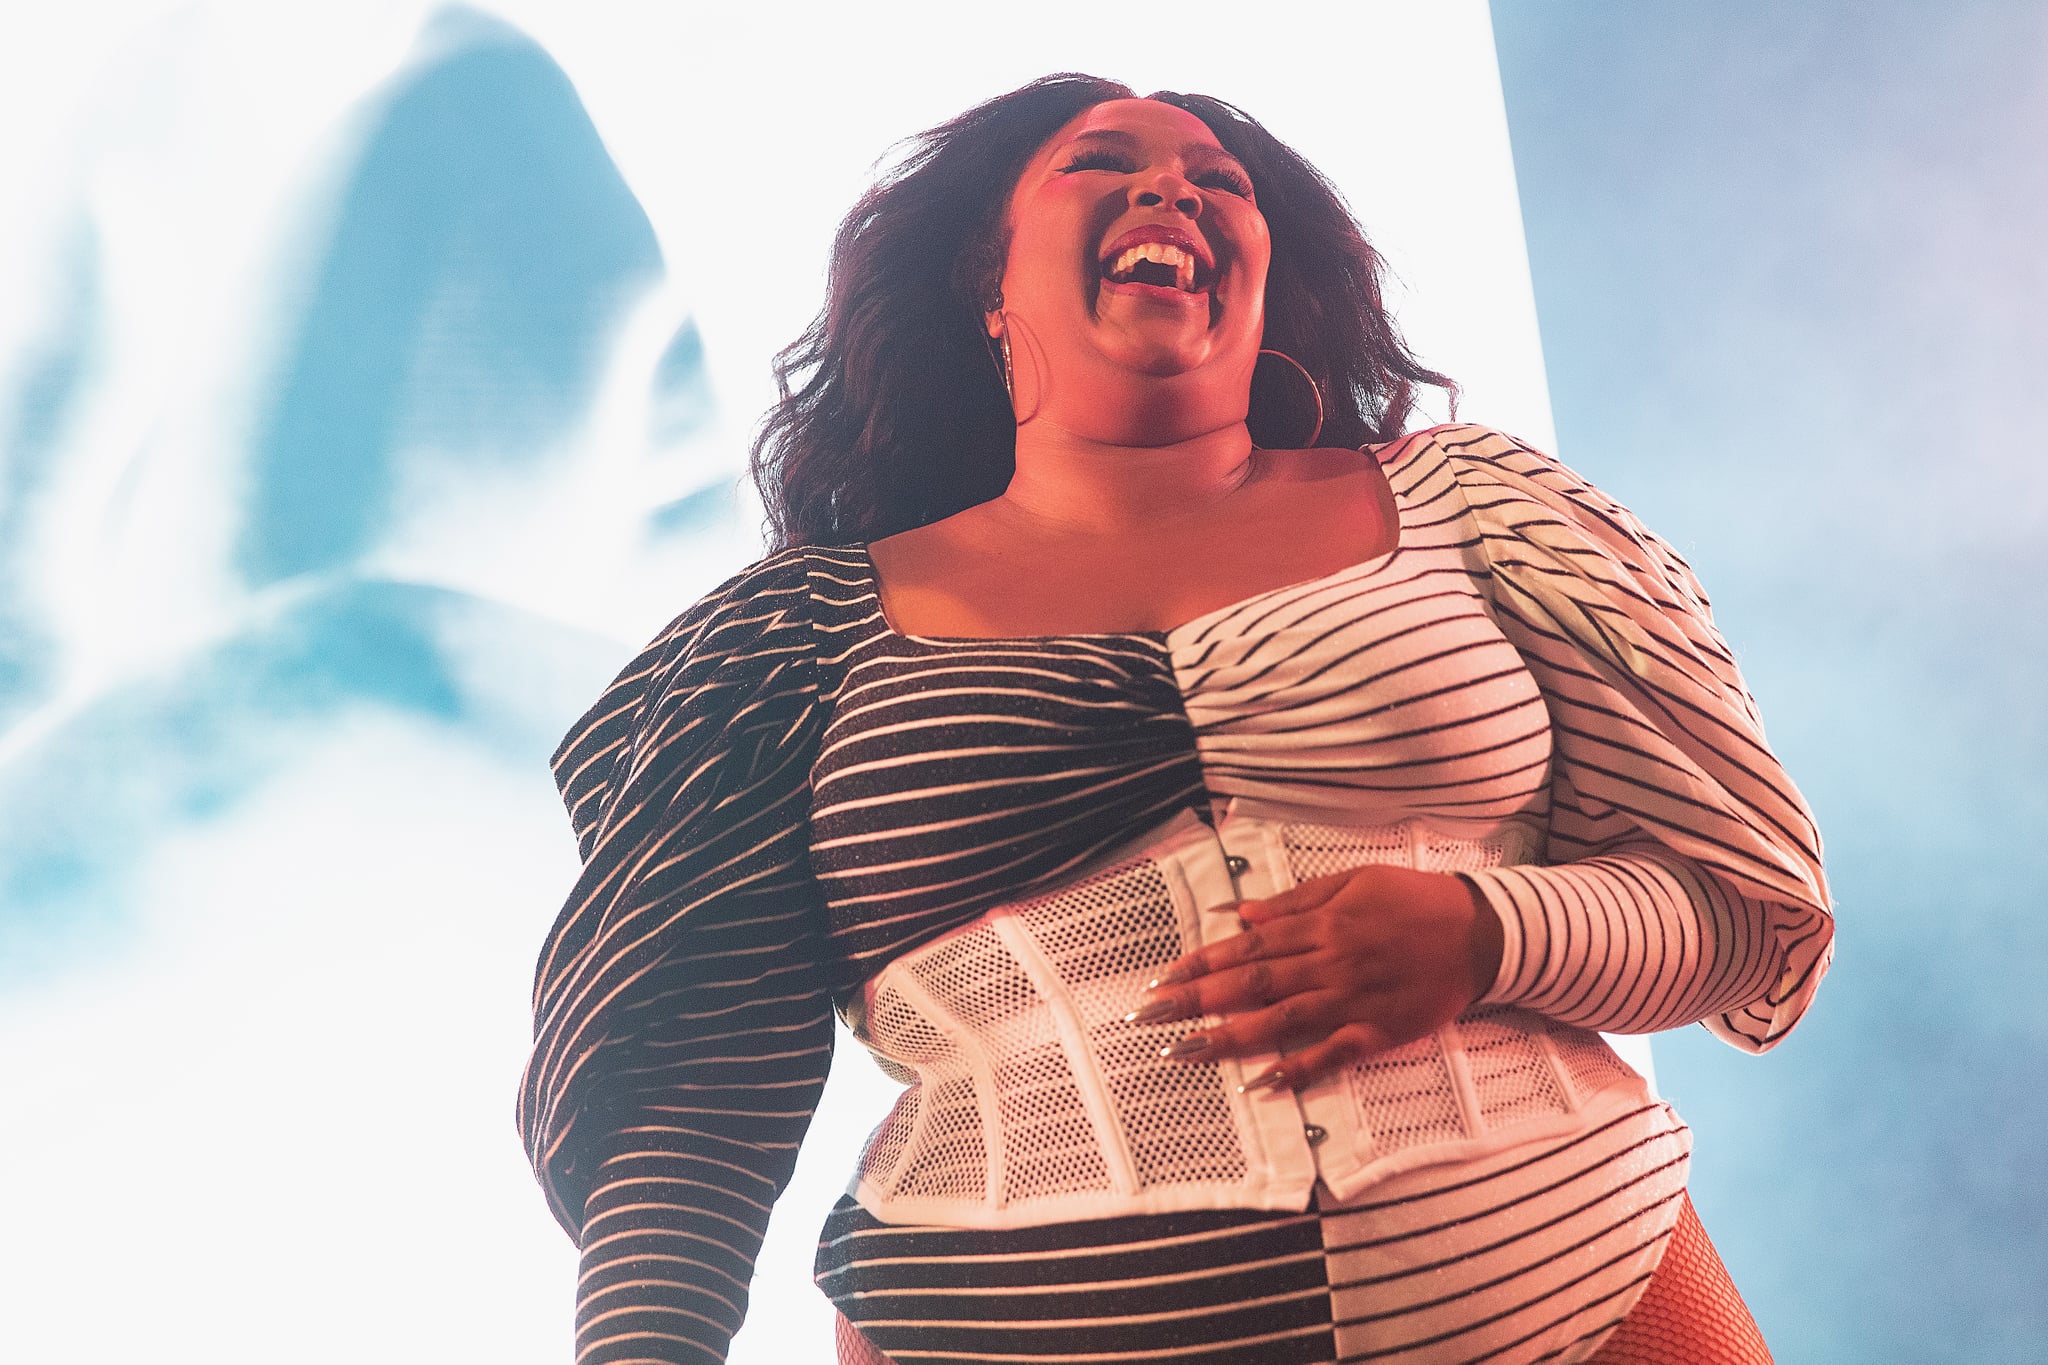 SEATTLE, WA - JULY 20:  Singer Lizzo performs on stage during the Capitol Hill Block Party on July 19, 2019 in Seattle, Washington.  (Photo by Mat Hayward/Getty Images)